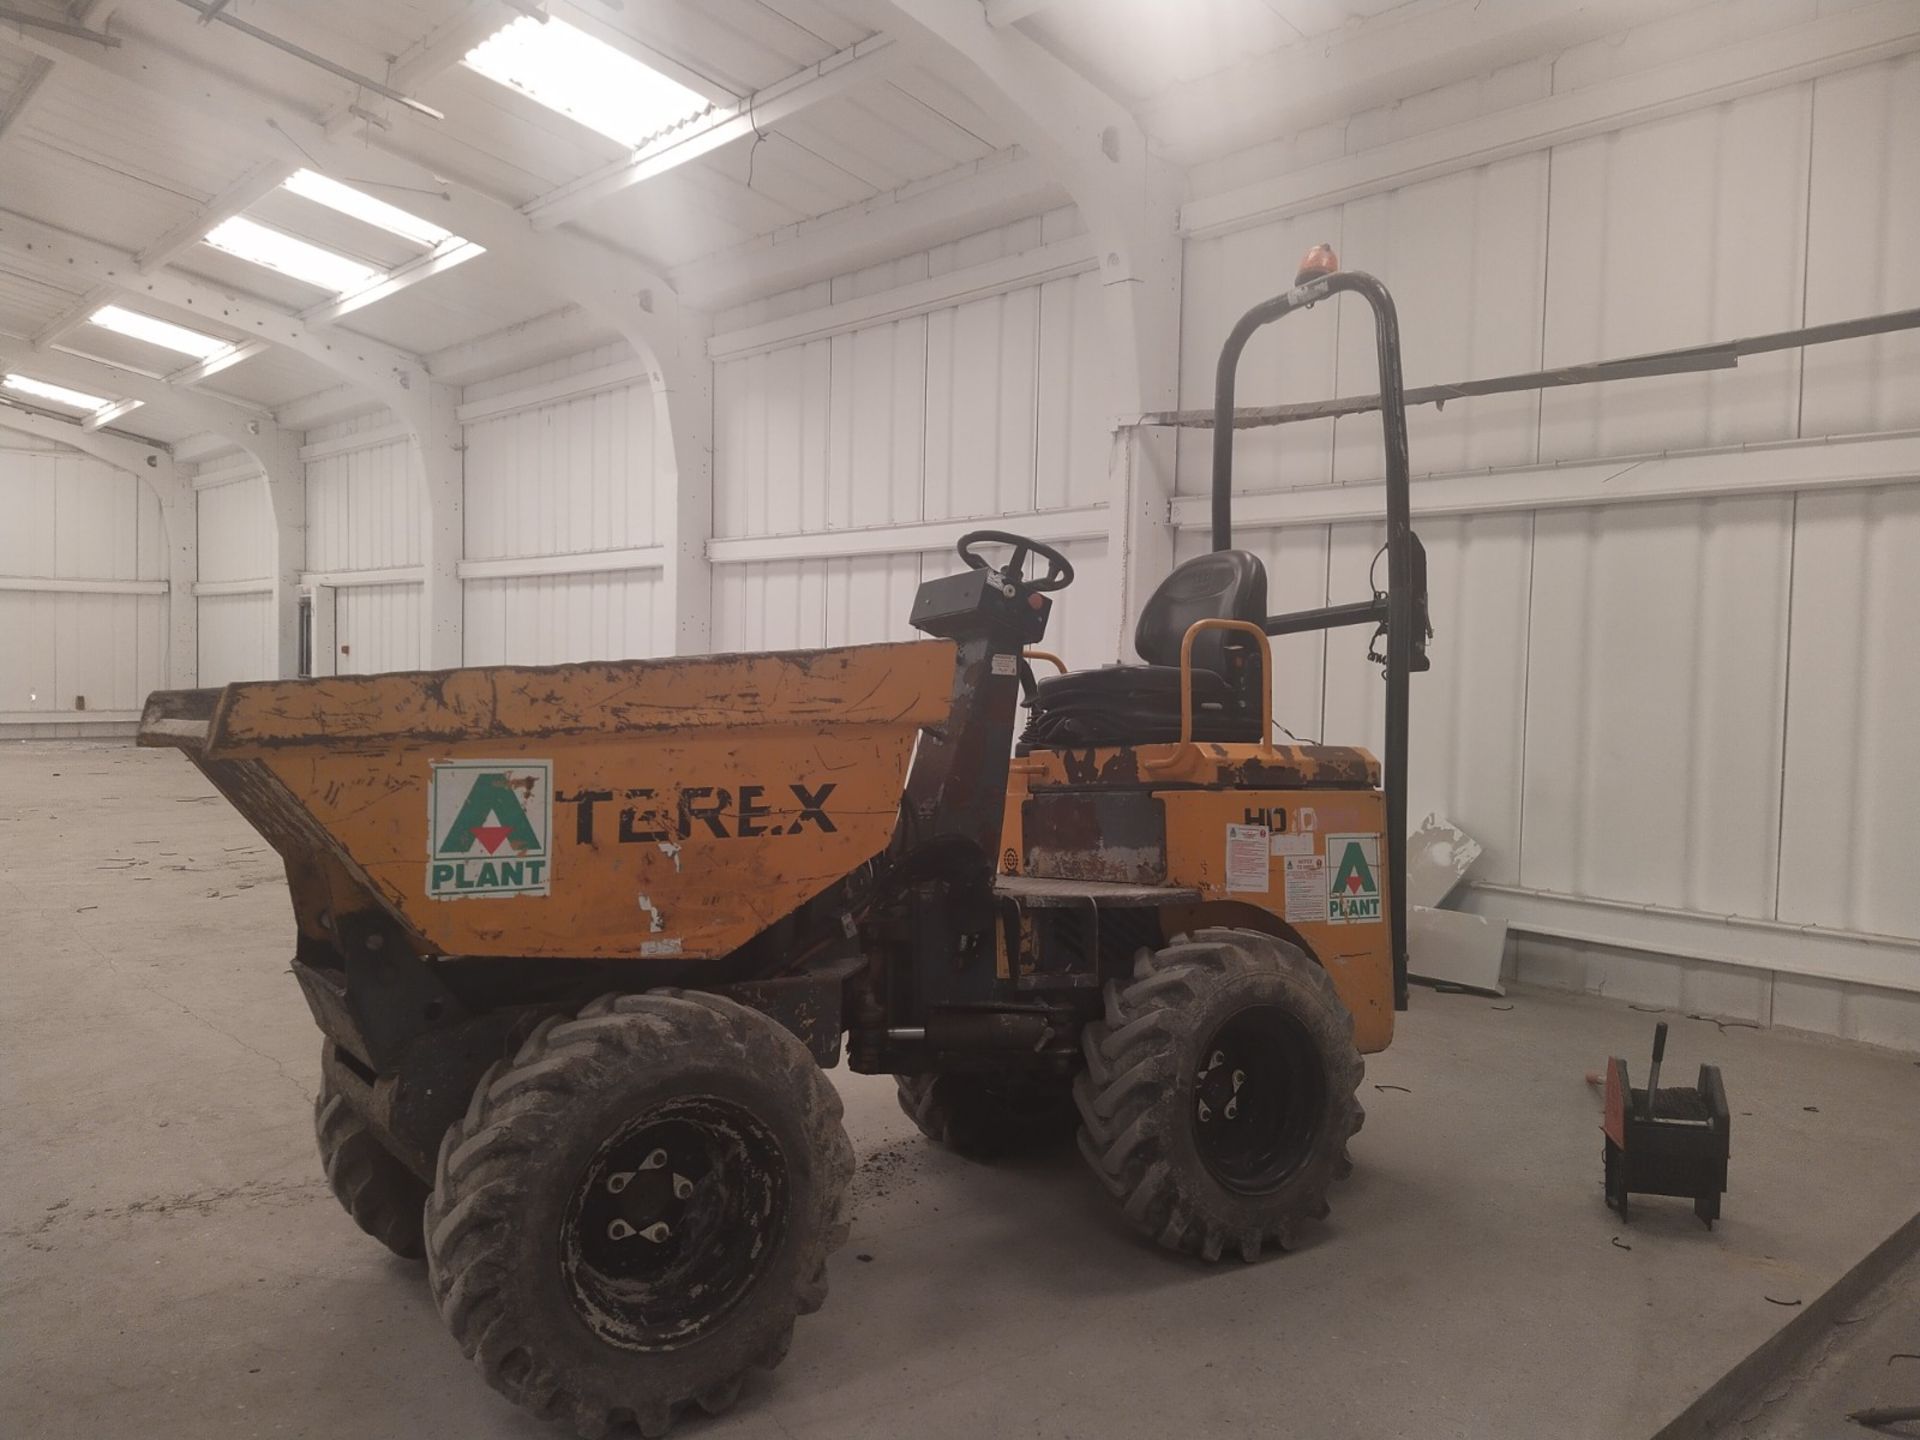 Terex High Tip Dumper, free loading onto purchasers transport - Yes, item located at Guttercrest